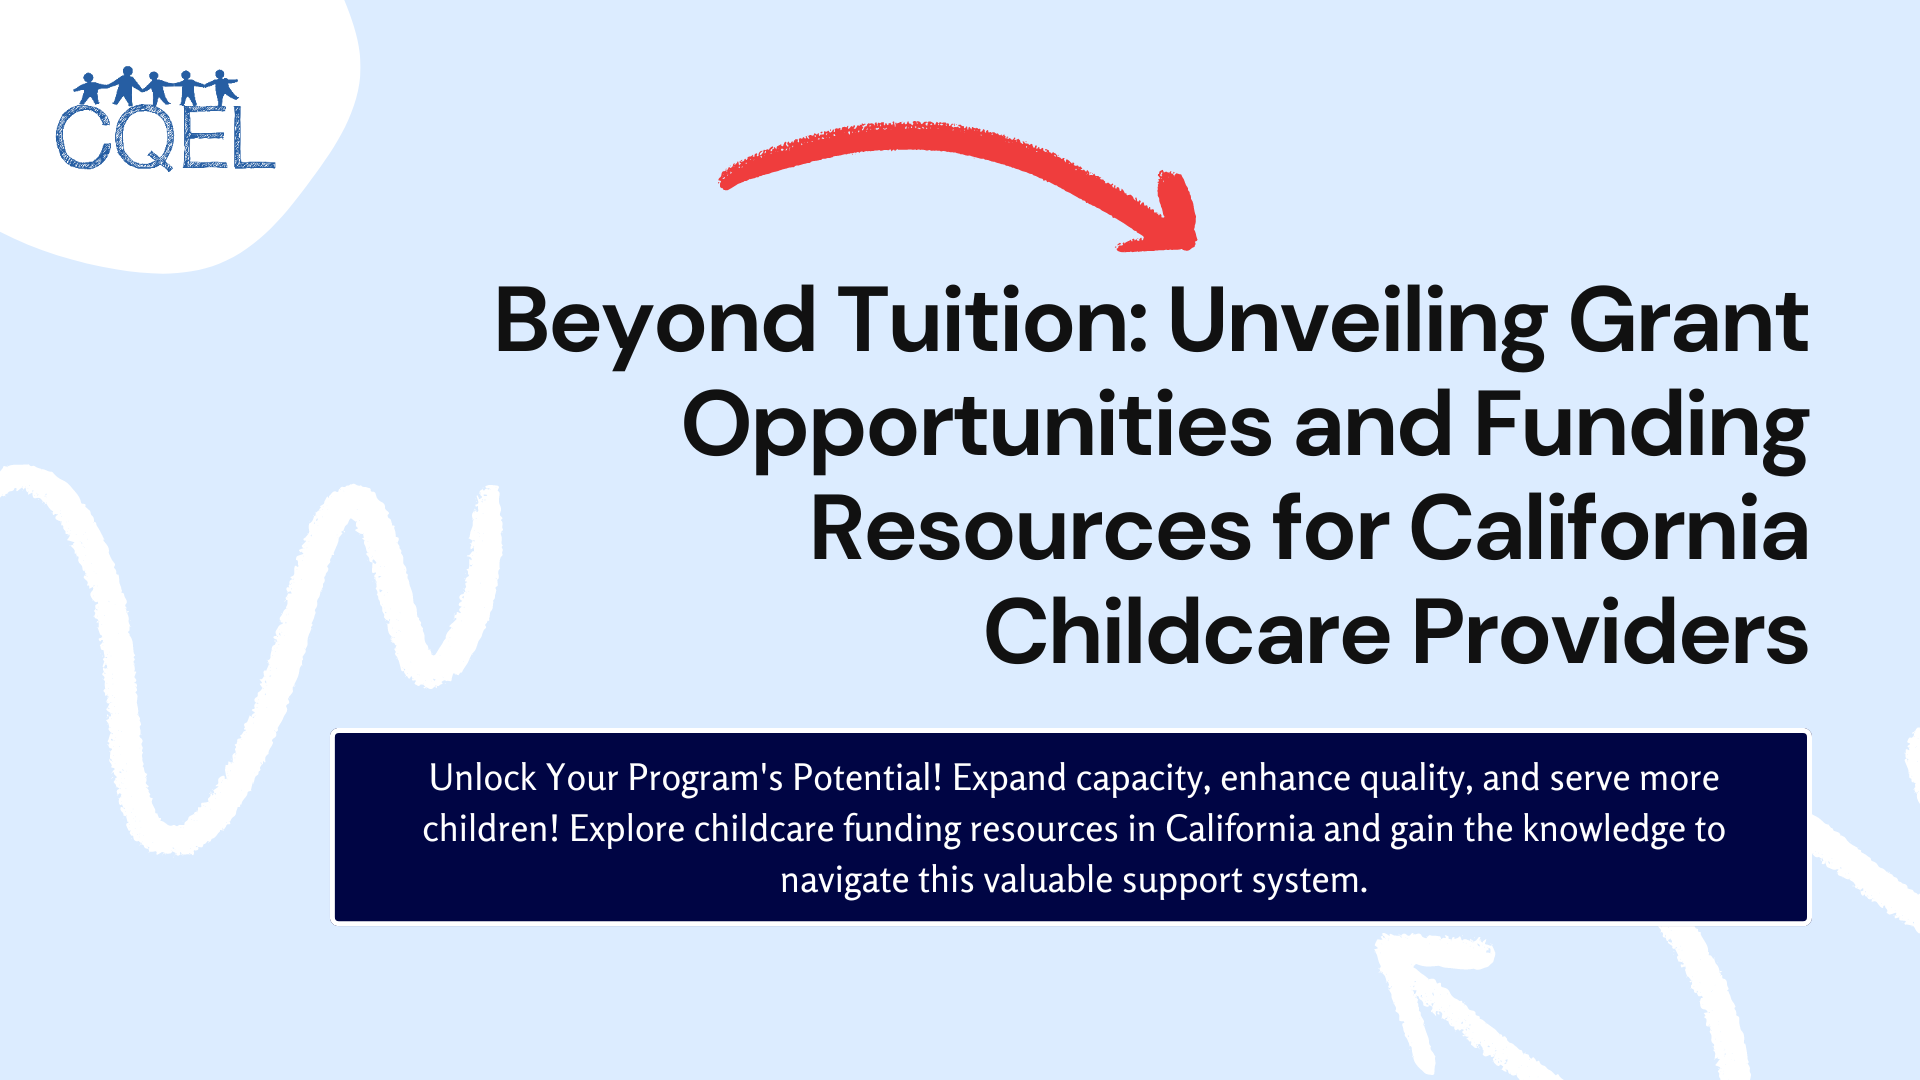 Beyond Tuition: Unveiling Grant Opportunities and Funding Resources for California Childcare Providers